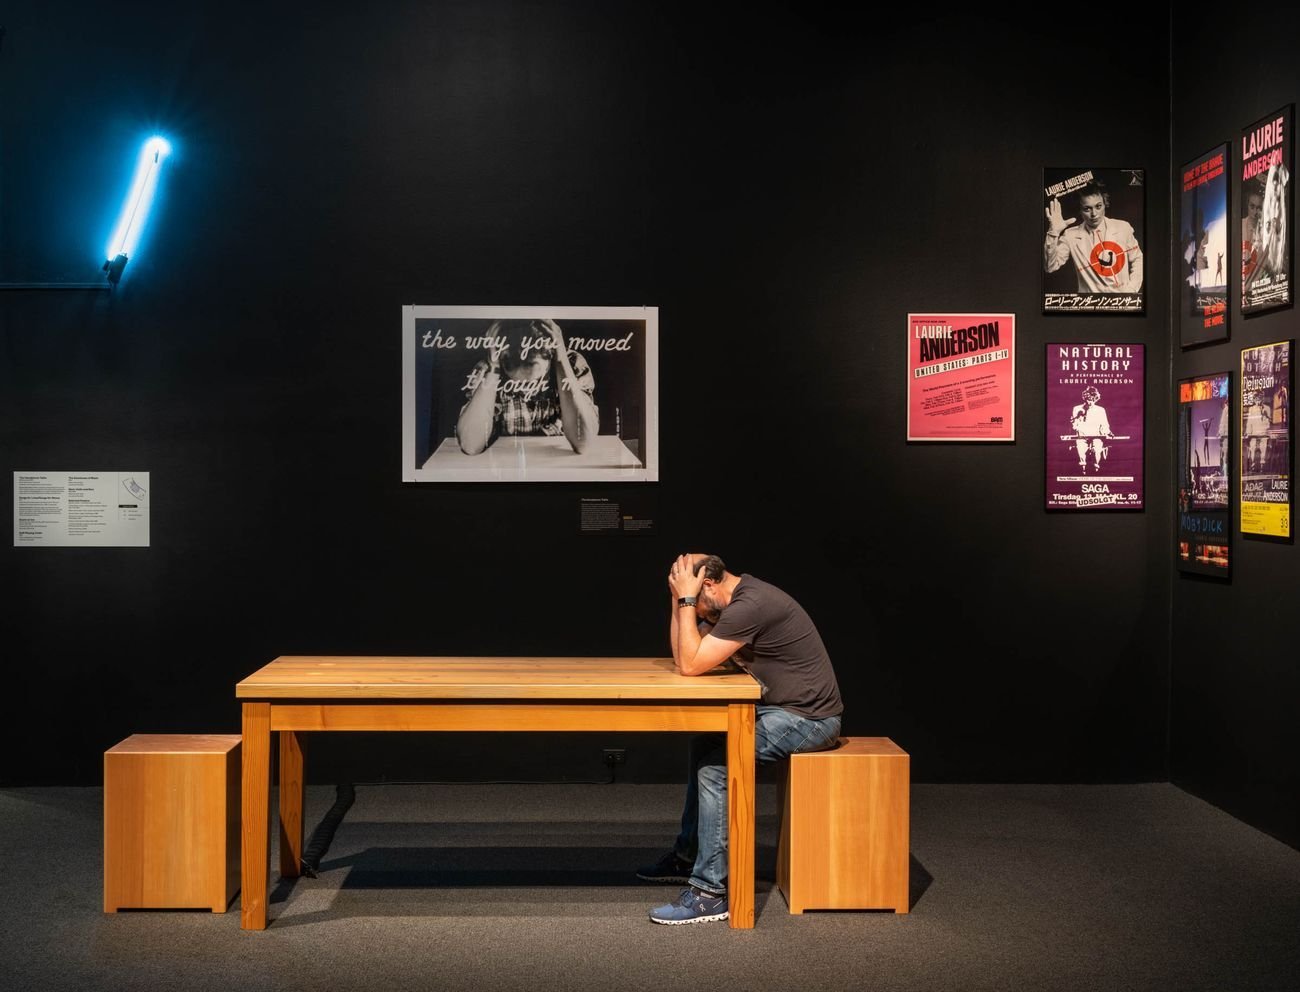 Laurie Anderson, The Handphone Table, 1978 (recreated 2017). Installation view at the Hirshhorn Museum and Sculpture Garden, Smithsonian Institution, Washington, DC, 2021. Exploratorium, San Francisco. Courtesy of the artist. Photo Ron Blunt